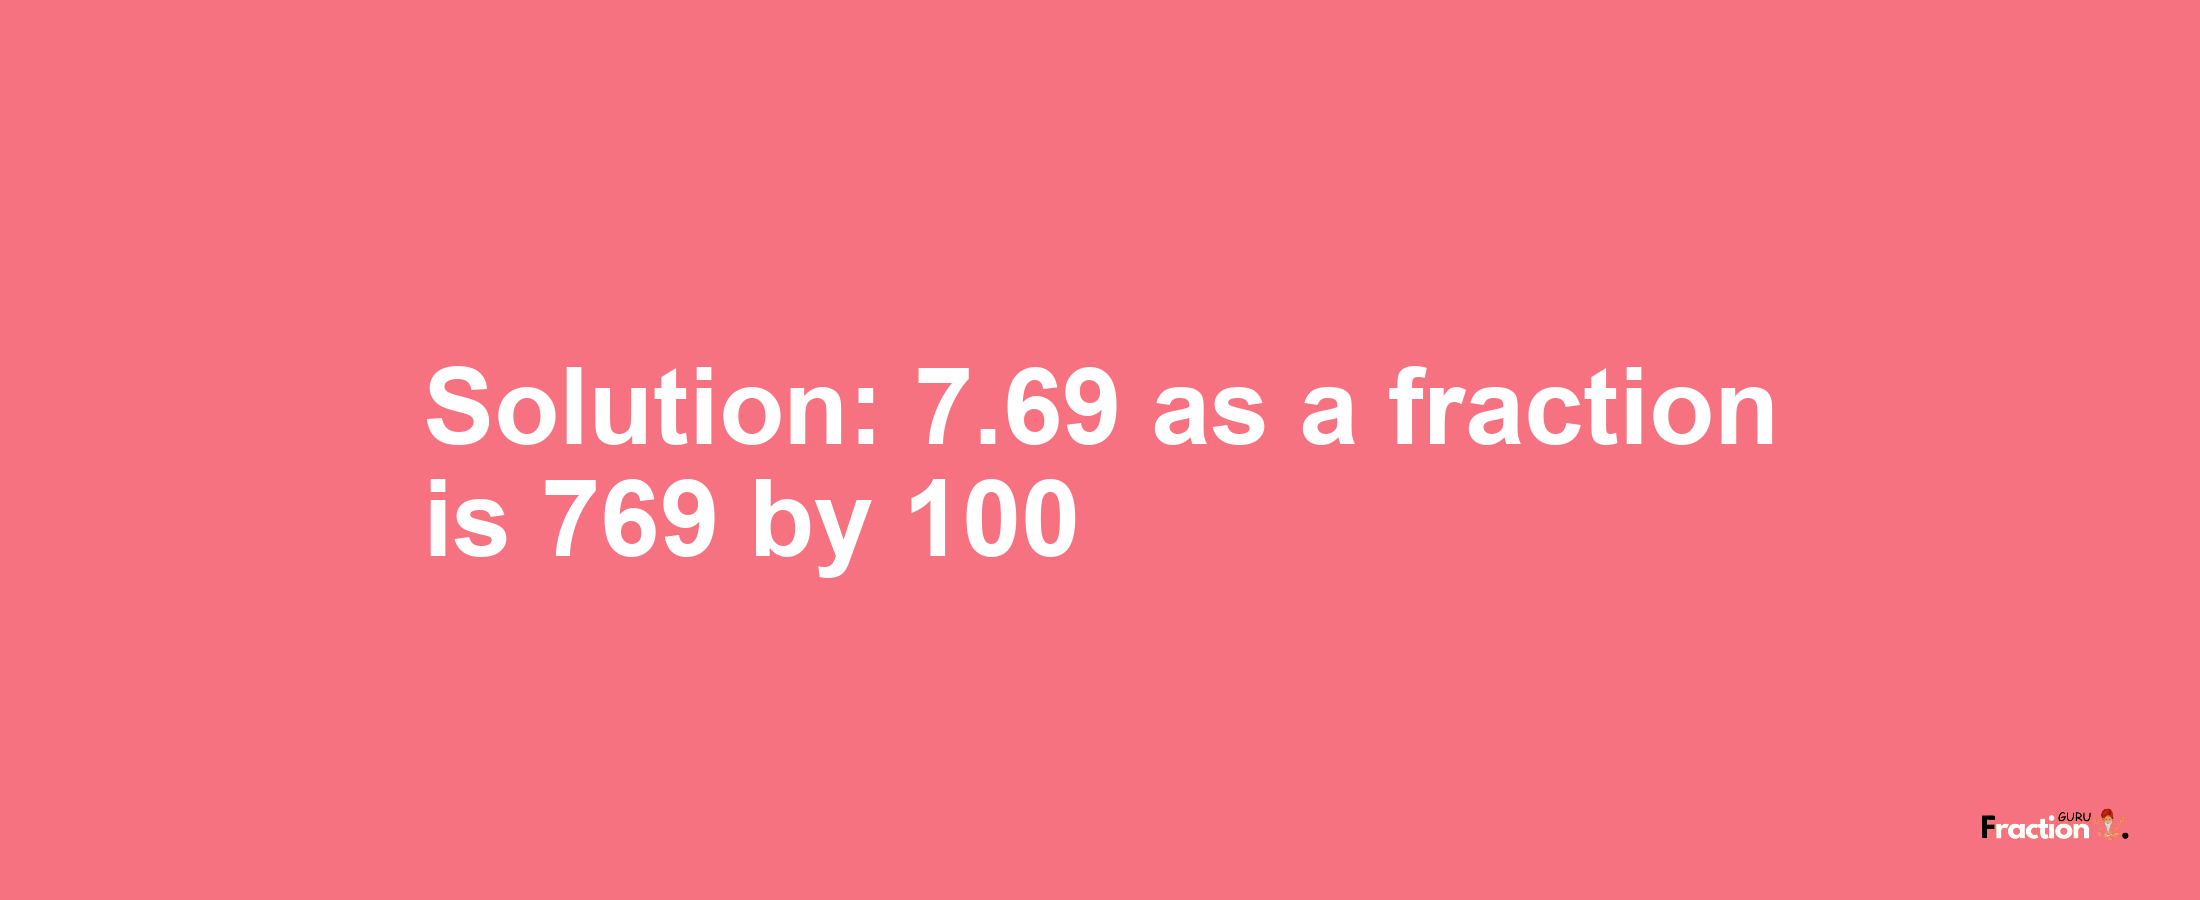 Solution:7.69 as a fraction is 769/100